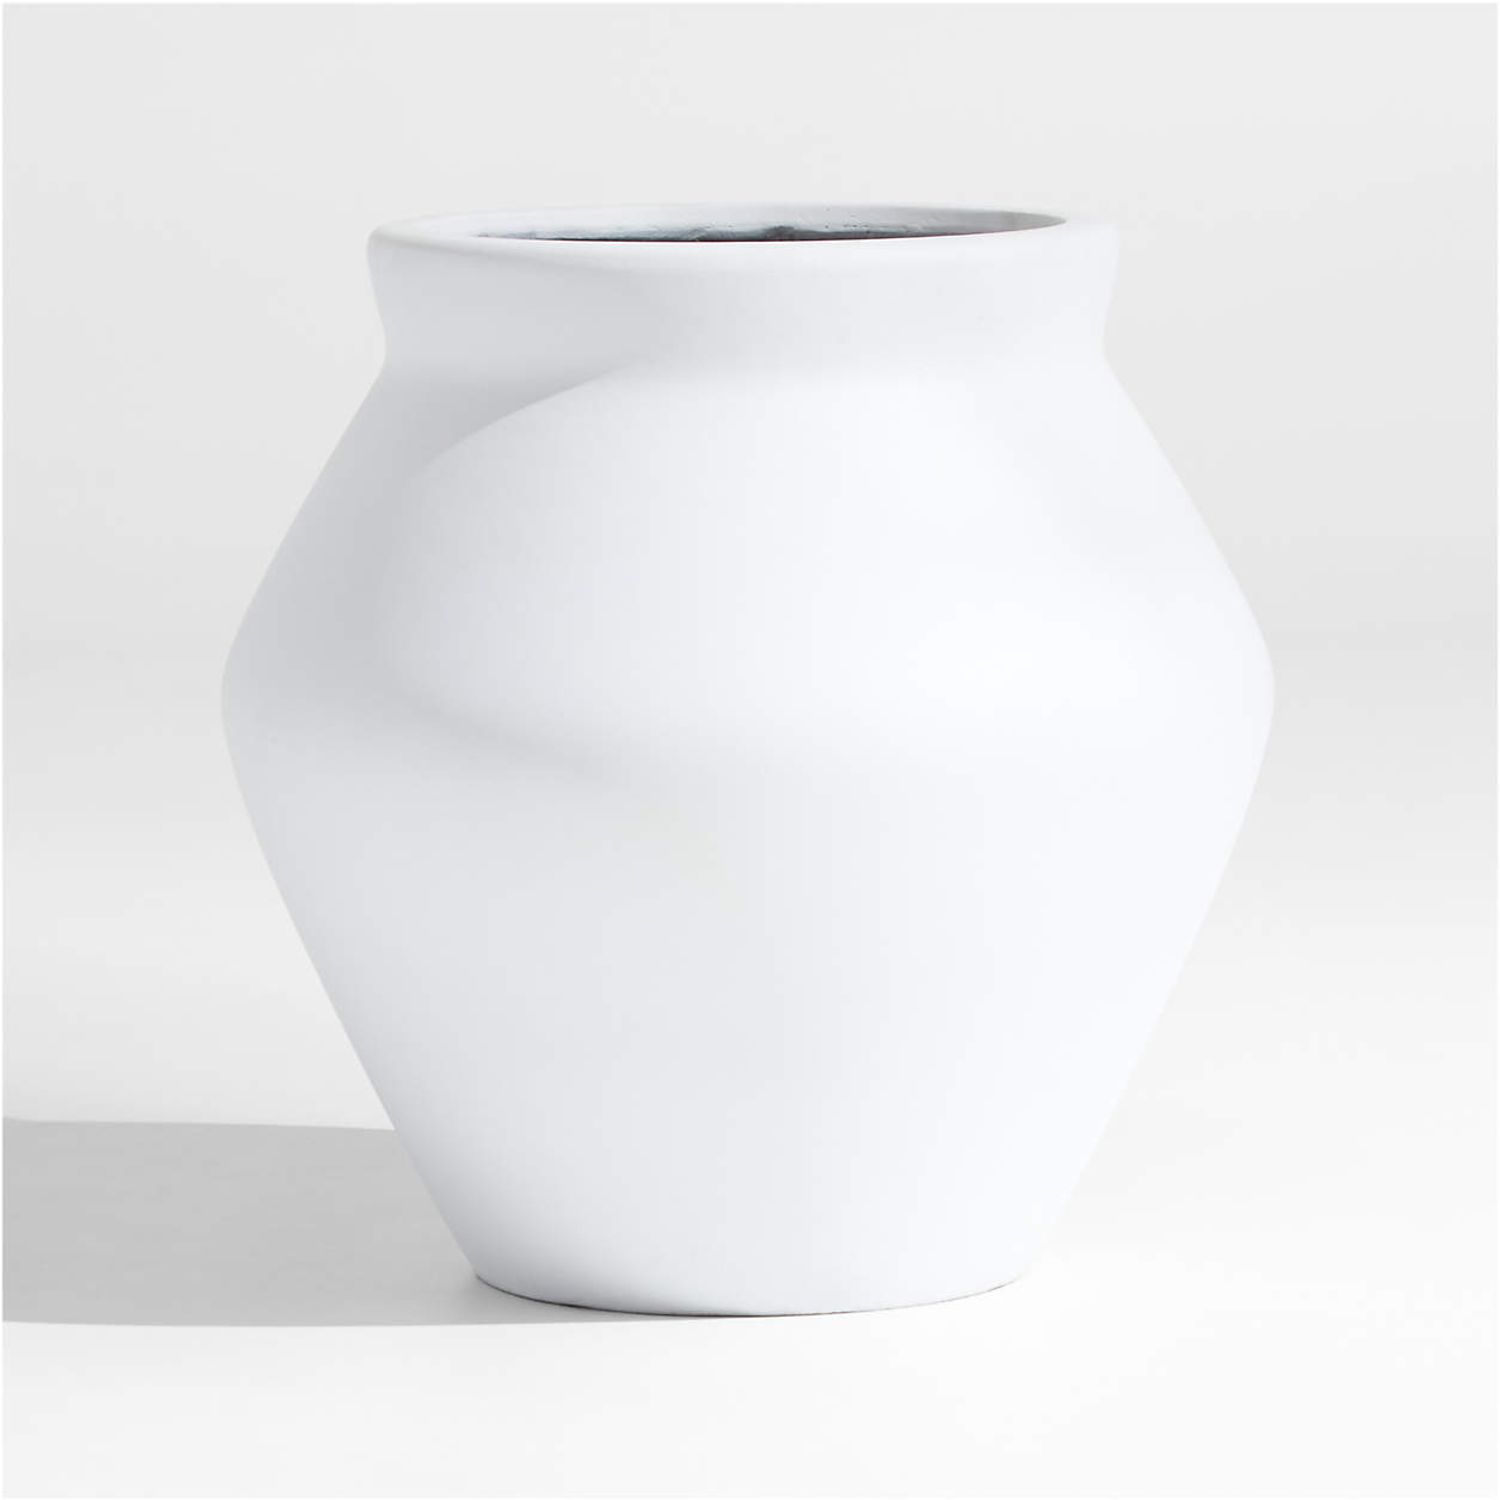 Shop Wabi Medium White Fiberstone Planter by Leanne Ford from Crate and Barrel on Openhaus